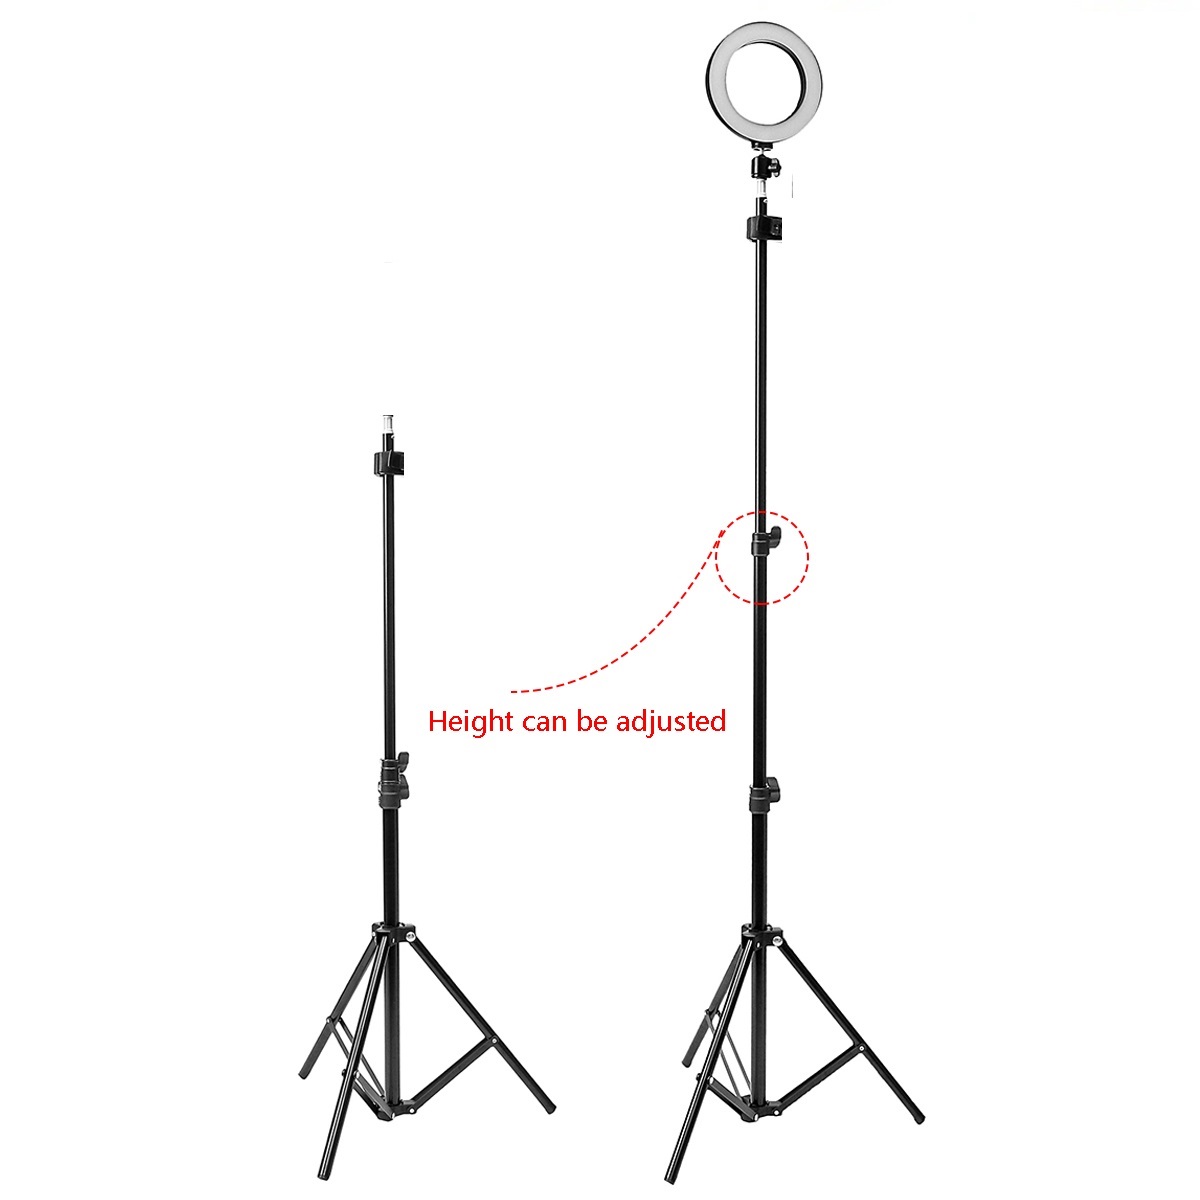 https://rcmmultimedia.com/storage/photos/1/tripods with lights/flash_ring_light_stand_21m1571395927.jpg